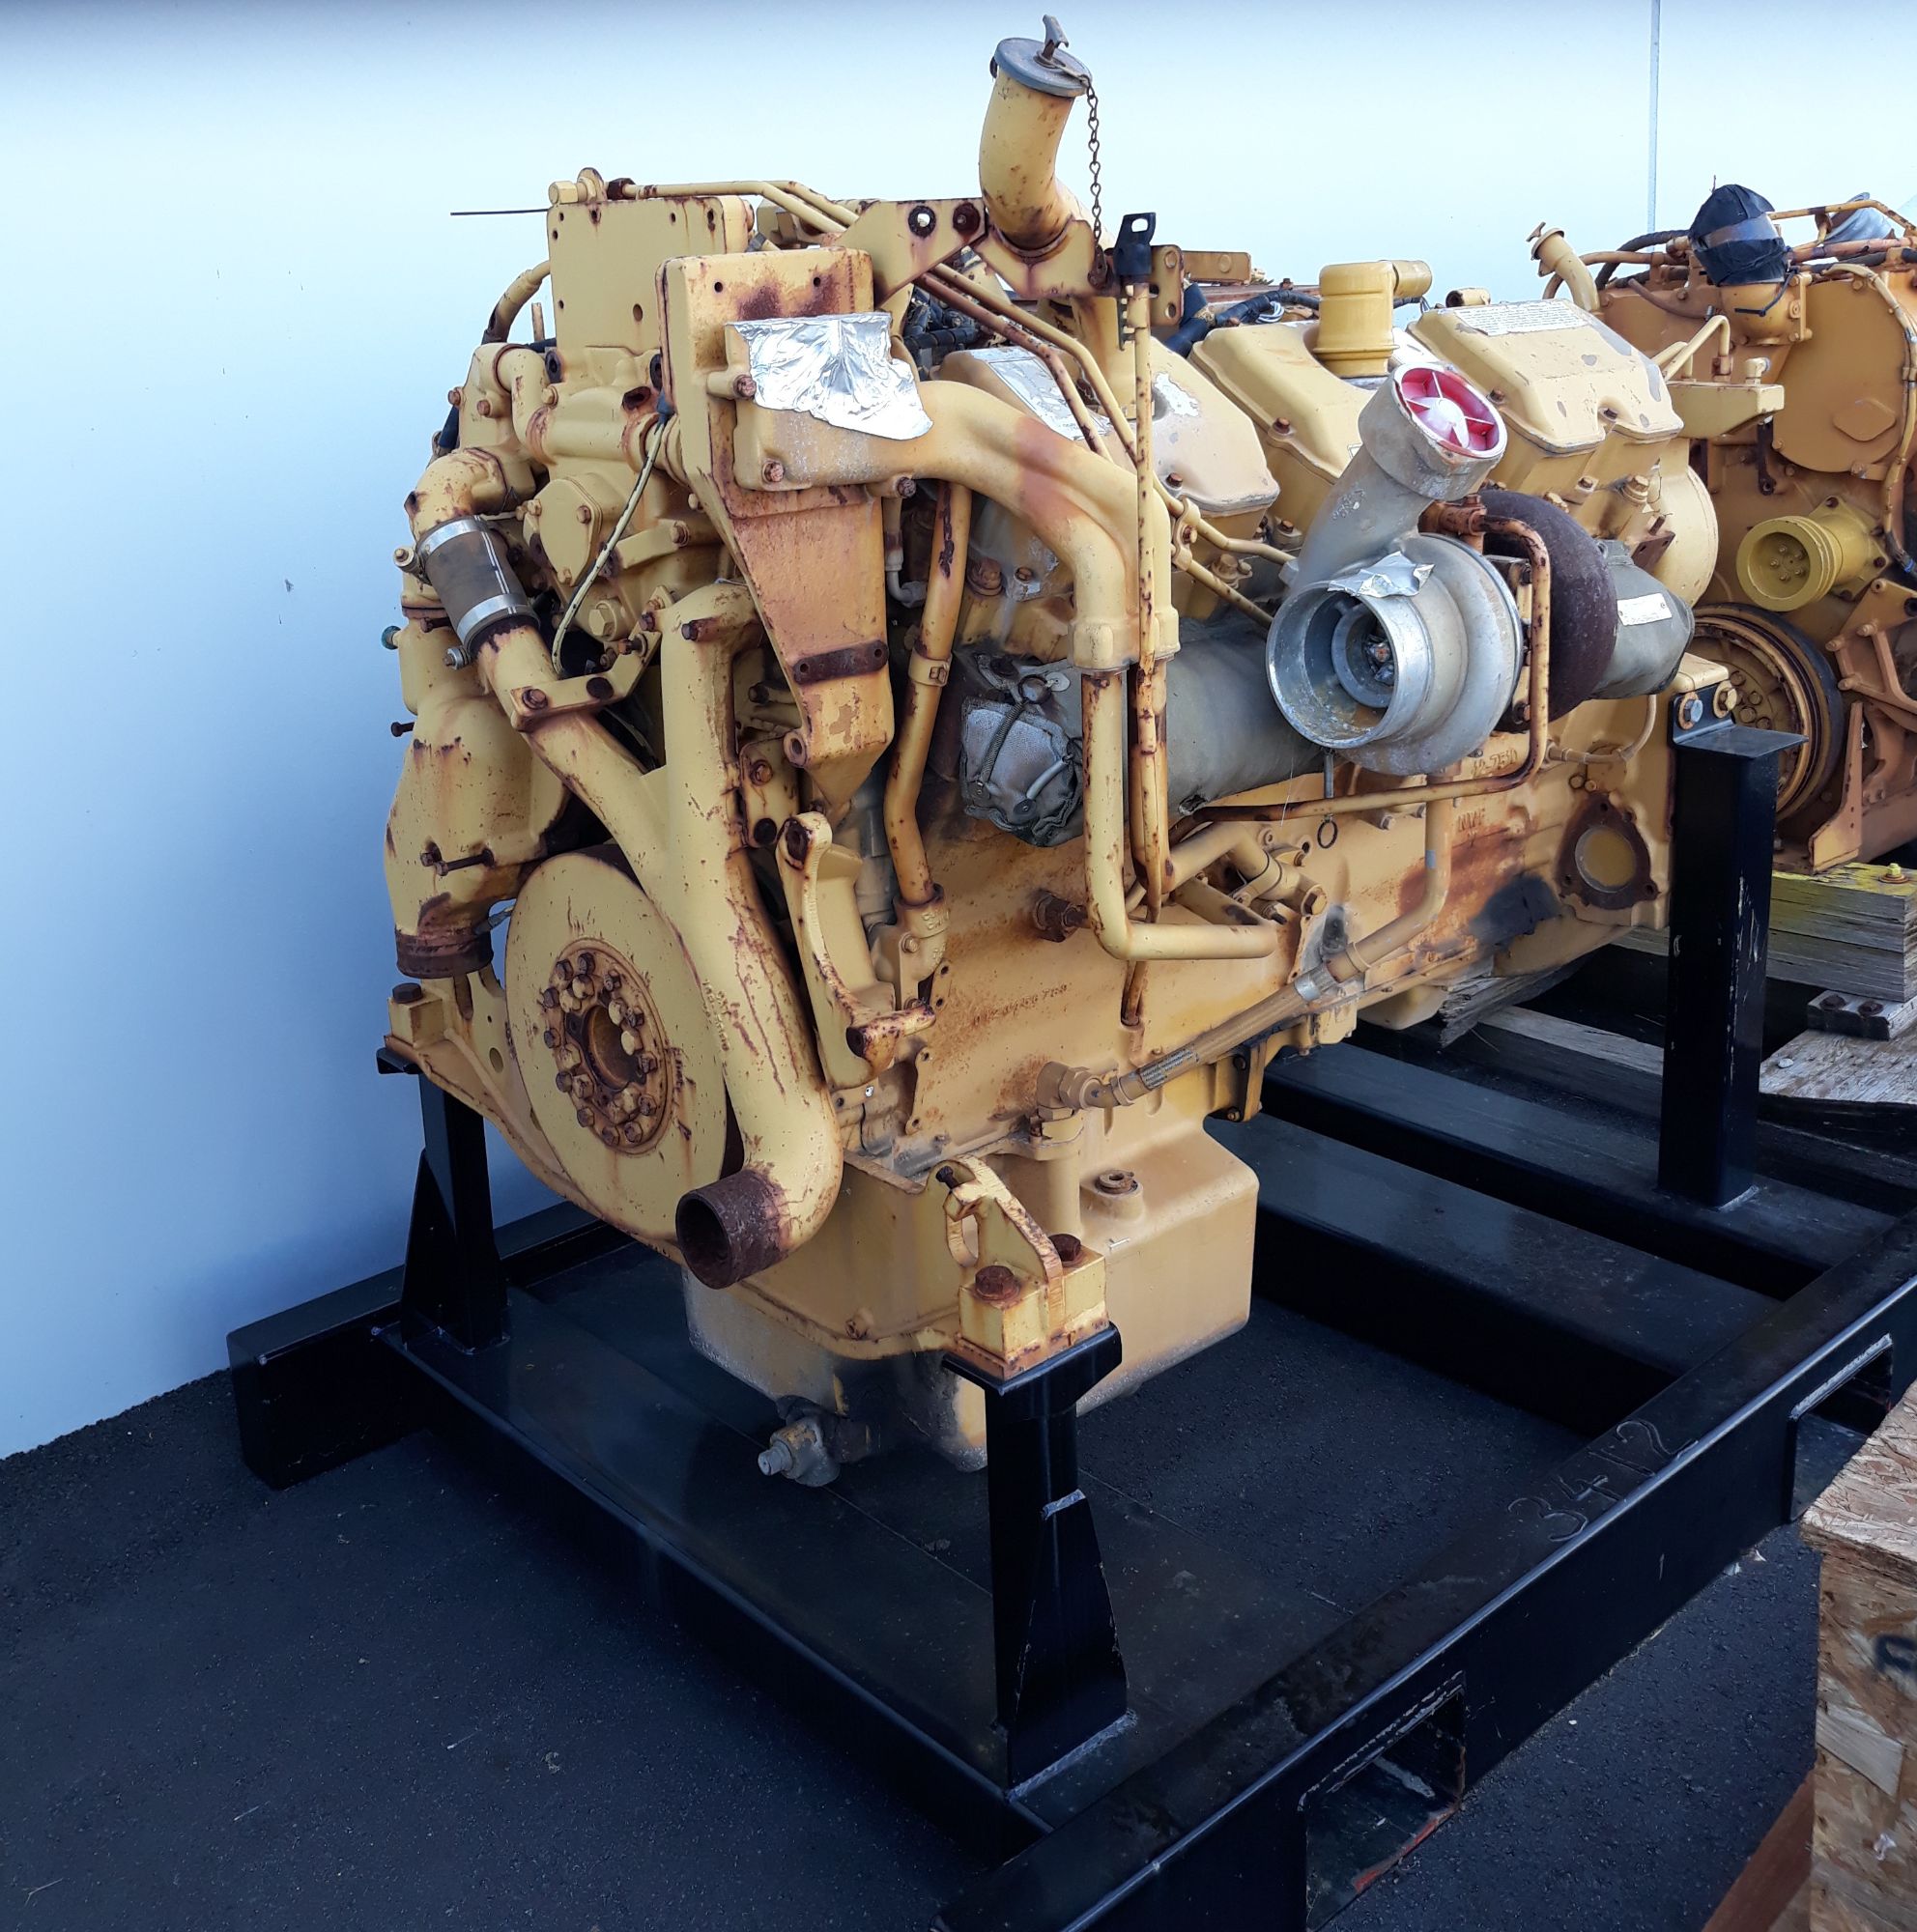 CaterpillarÂ® 3412 D9R HUEI Engine dismantled and used parts now available for sale throughout Australia